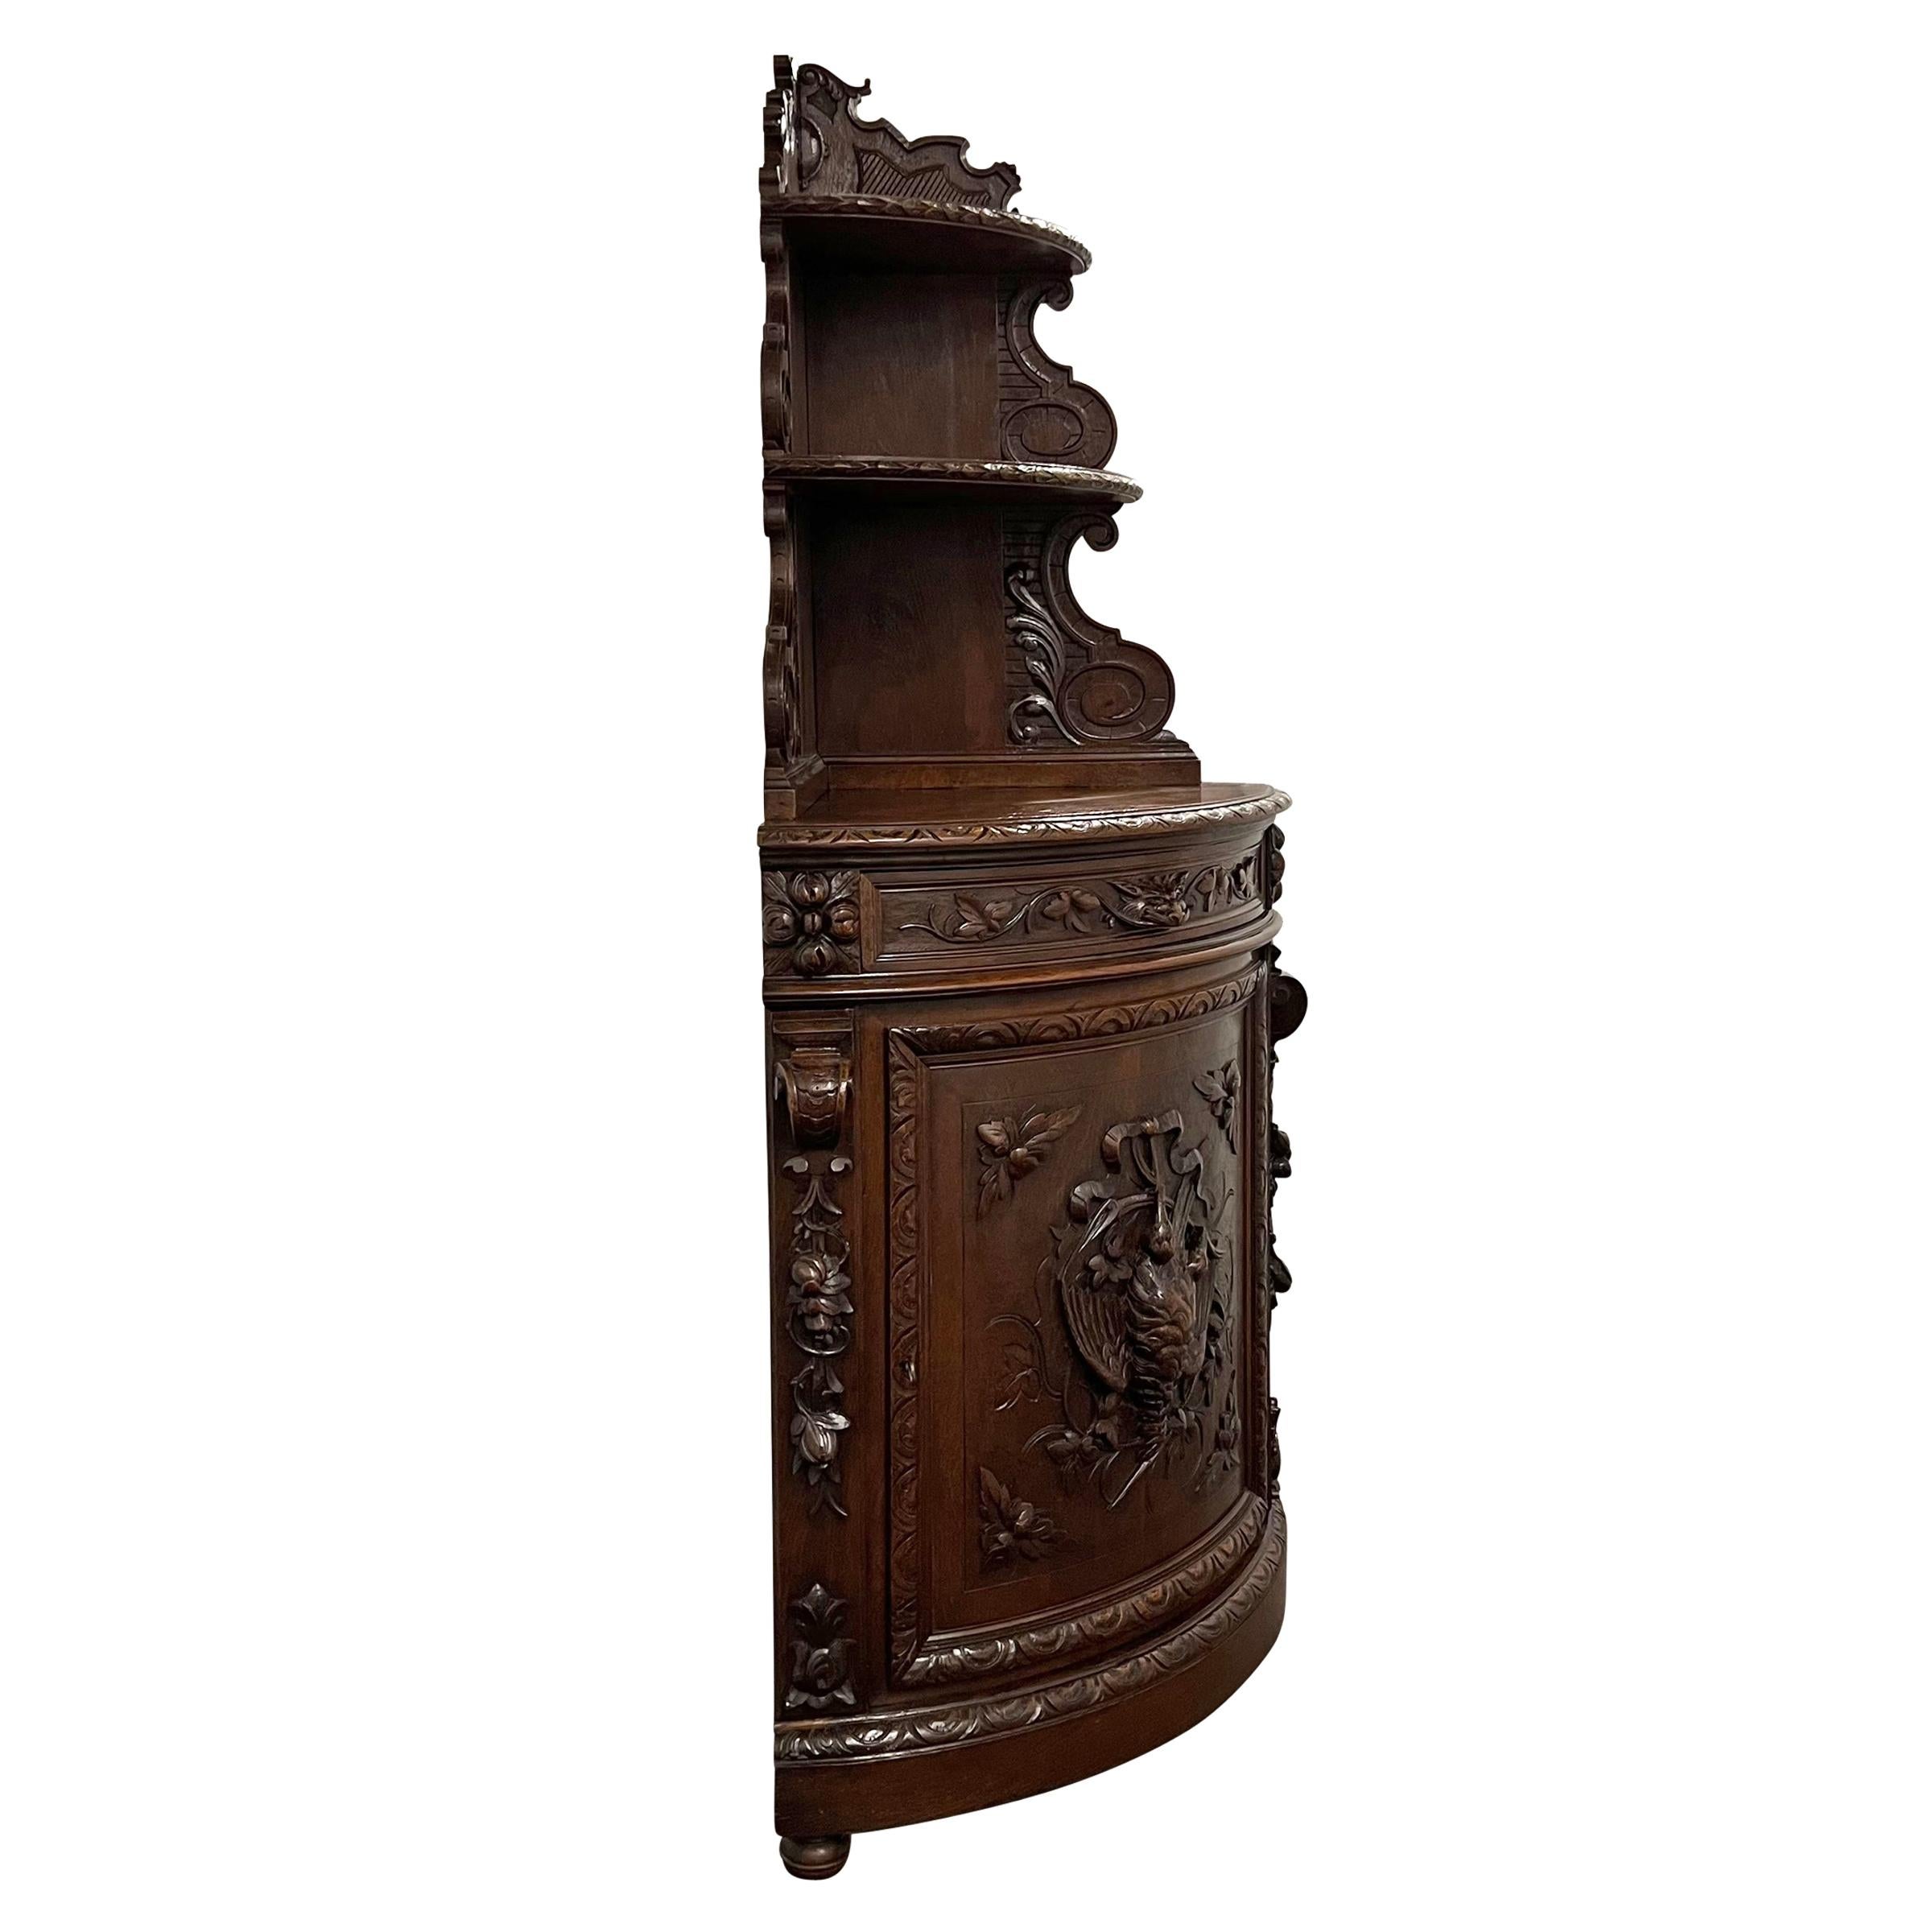 Neoclassical Revival 19th Century French Hunt-Themed Corner Cabinet For Sale